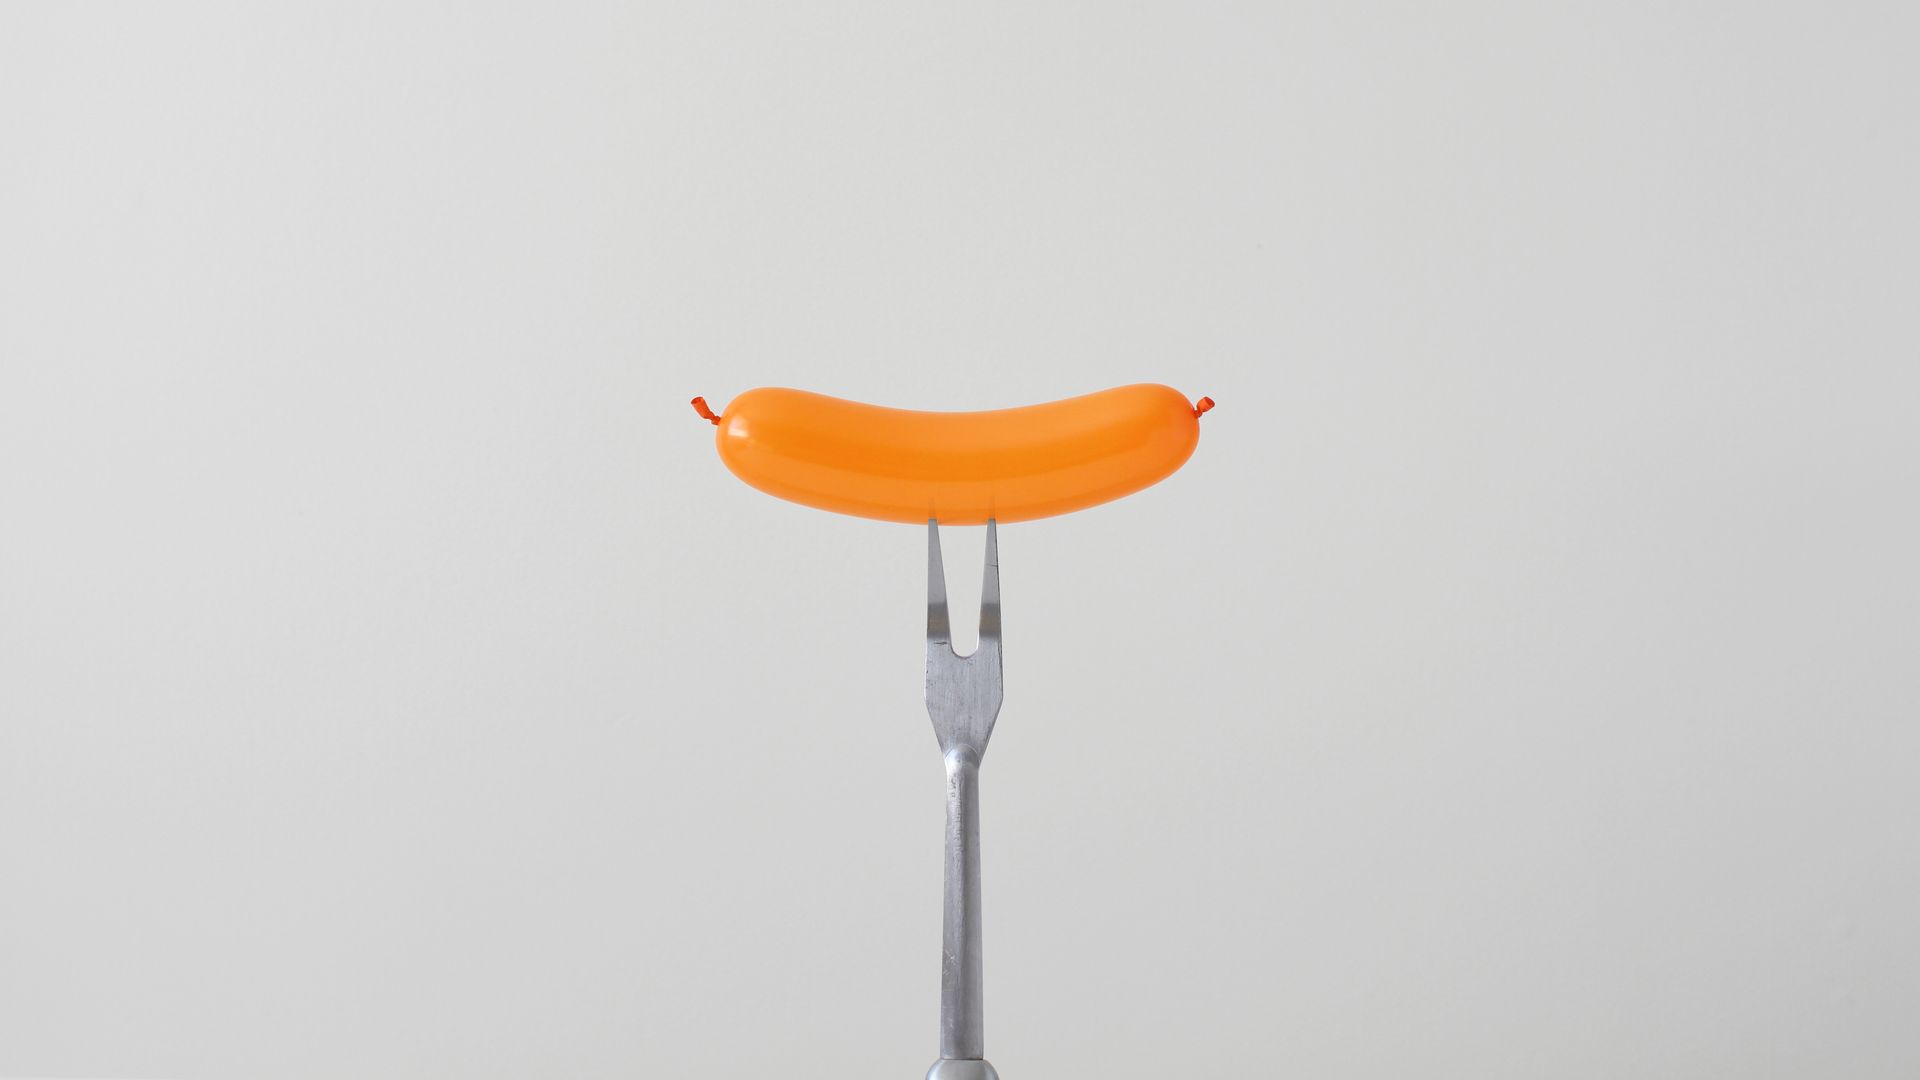 A balloon shaped like a hot dog is skewered on a metal fork. 